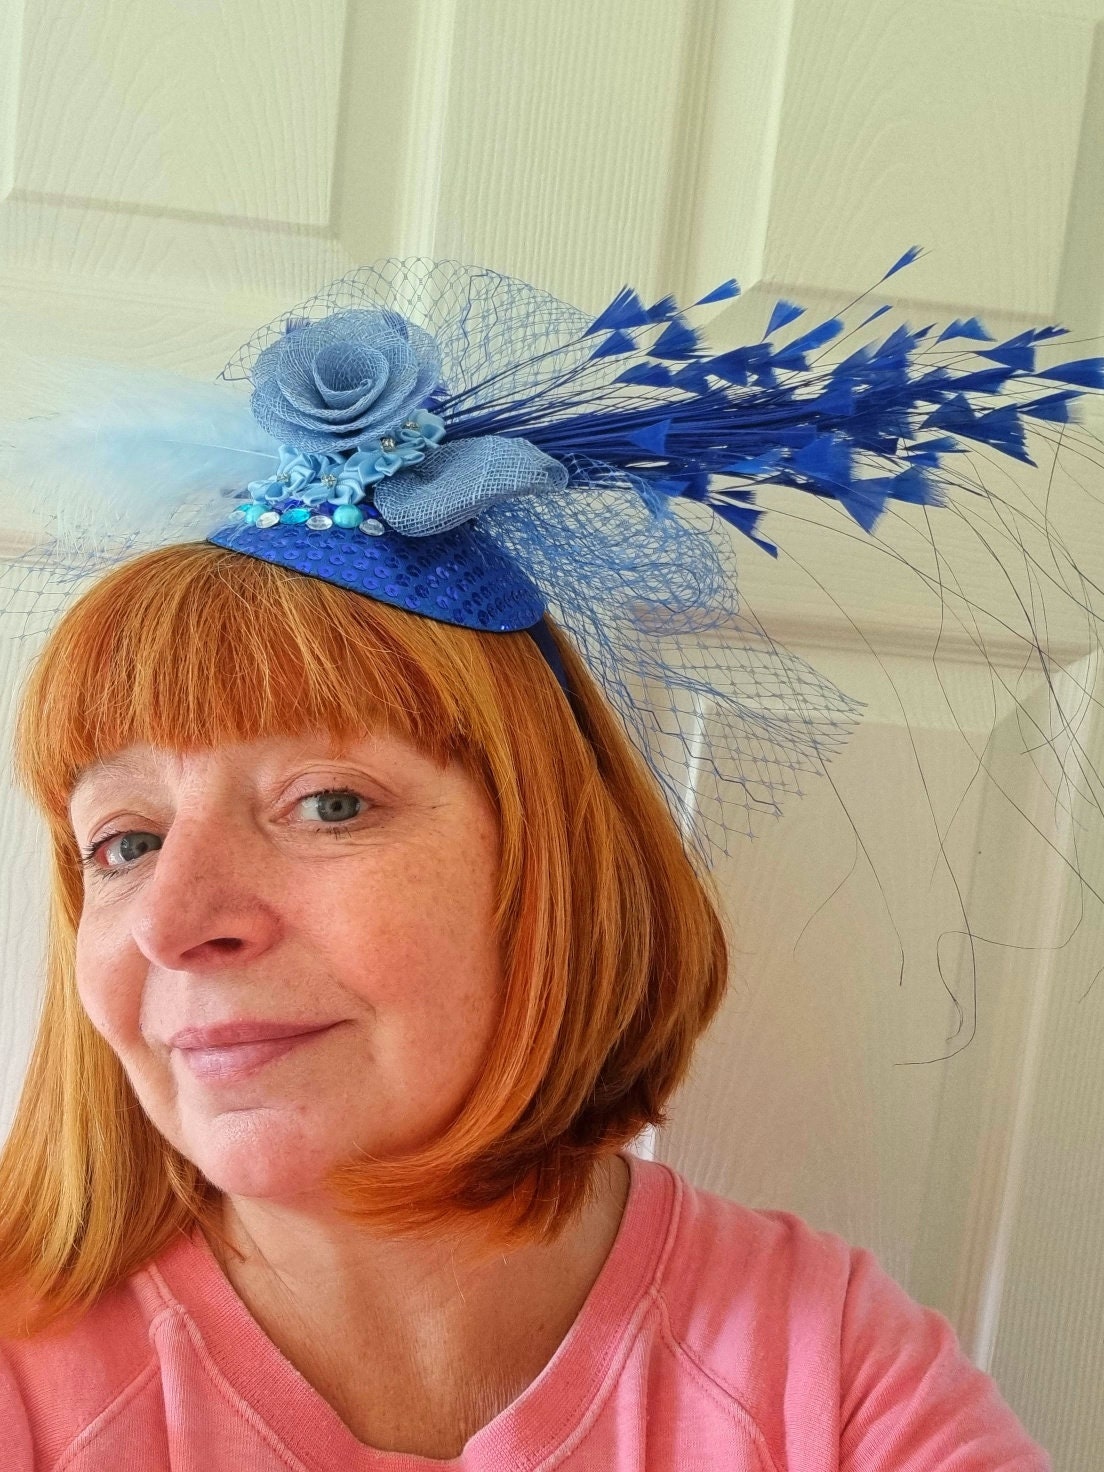 Royal blue powder blue flower fascinator sinamay sequin jewels feathers Mother of the bride wedding races pillbox hat hatinator band women